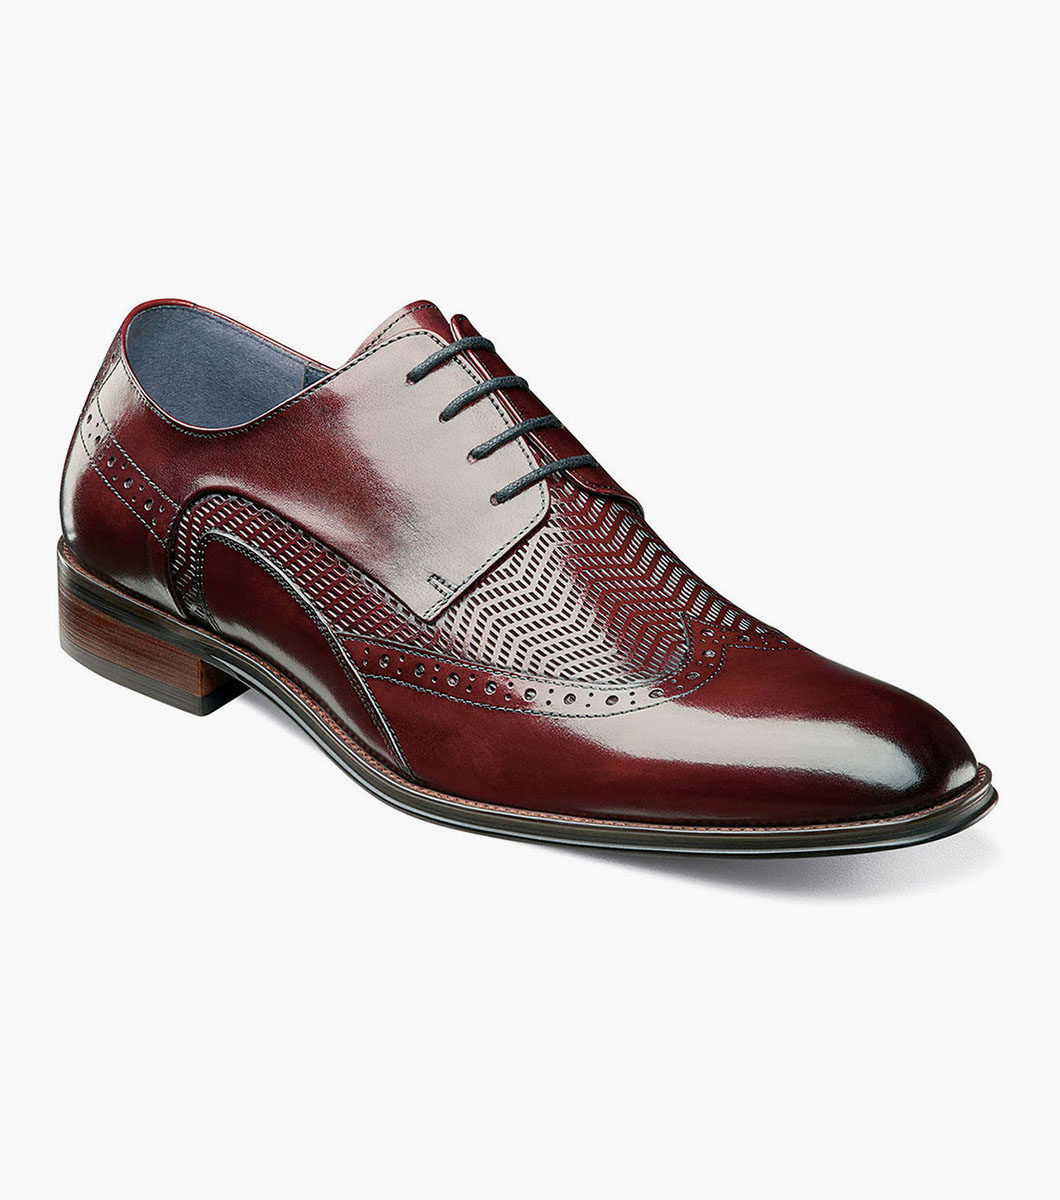 Stacy Adams Burgundy Shoes Top Sellers, 54% OFF | campingcanyelles.com